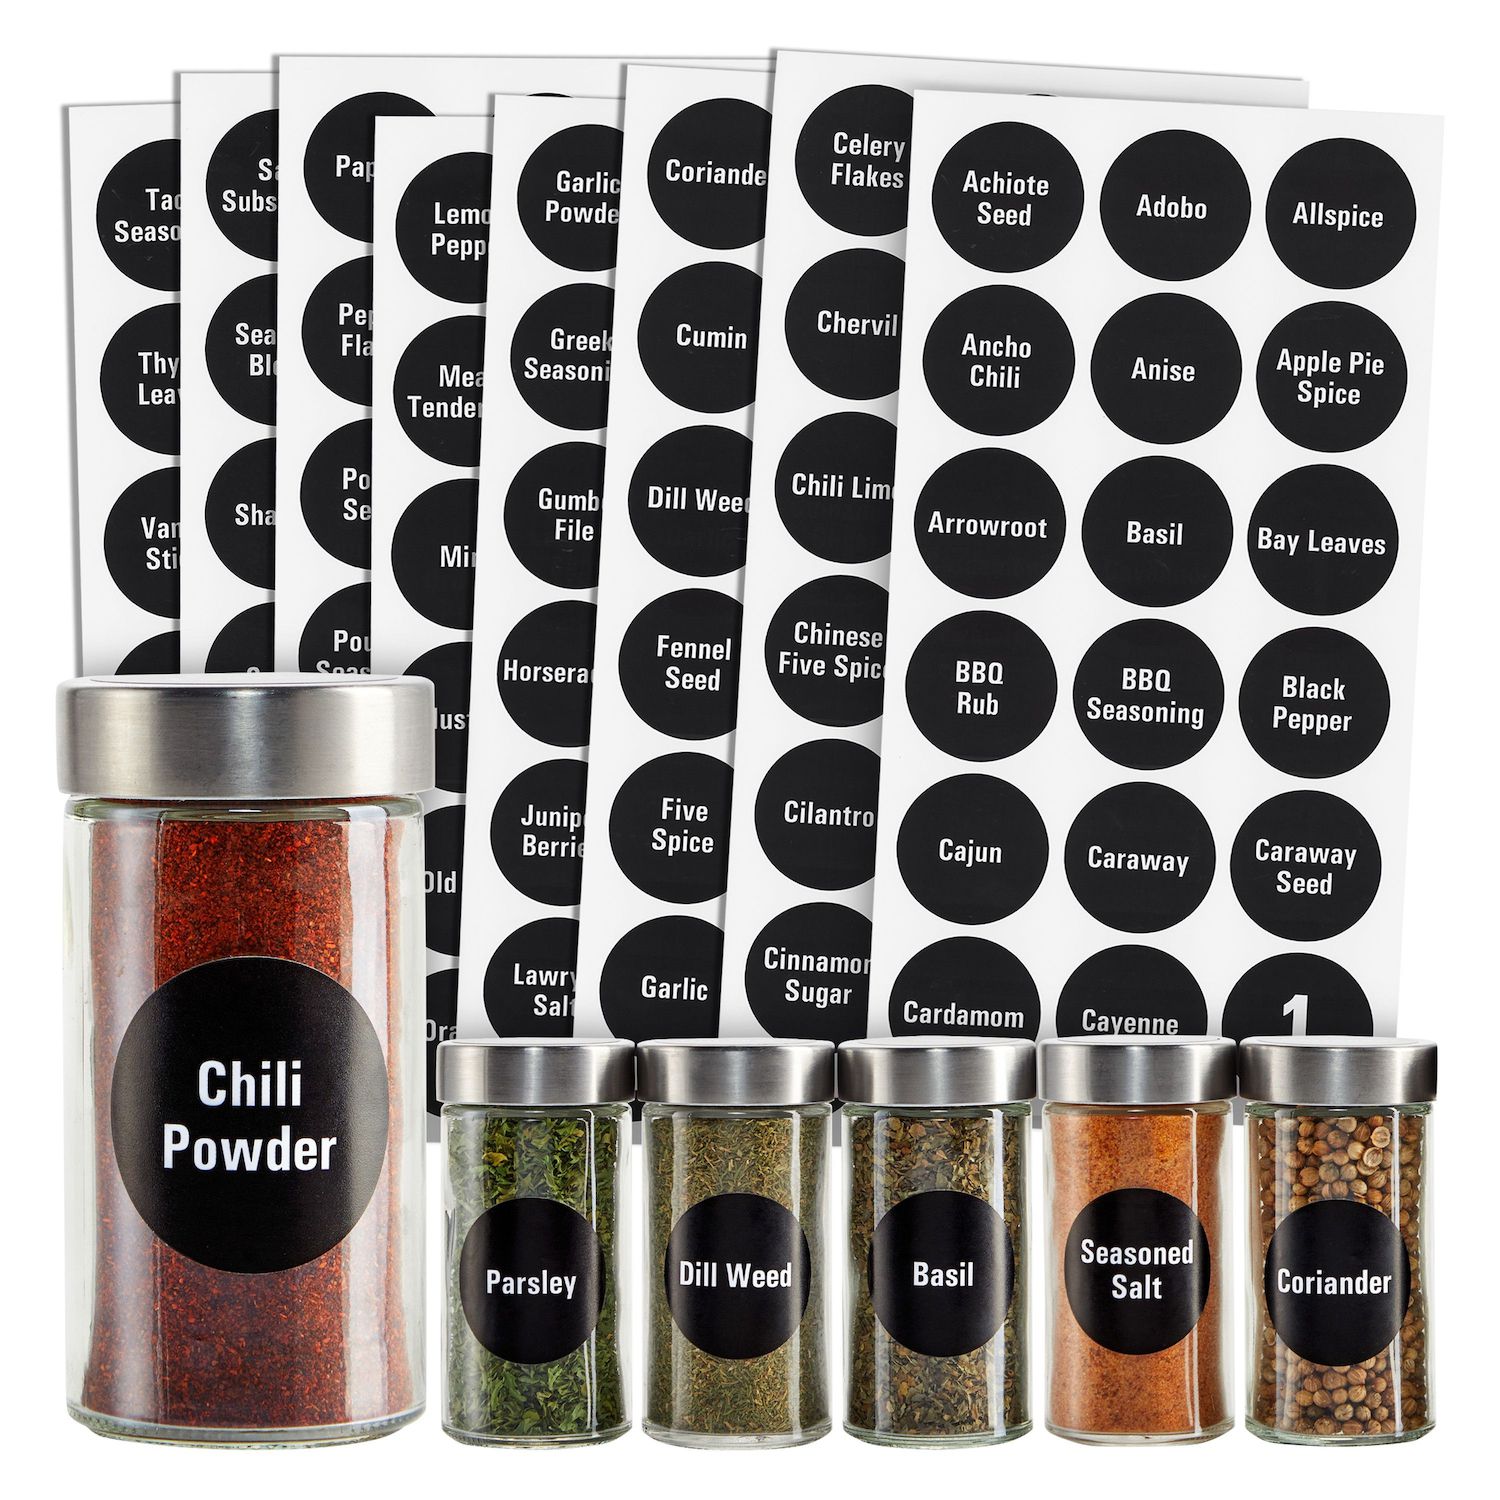 14 Glass Spice Jars w/2 Types of Preprinted Spice Labels. Commercial Grade,  Complete Set: 14 Square Empty Jars 4oz, Pour/Sift & Coarse Shakers,  Airtight Cap, Chalkboard & Clear Labels